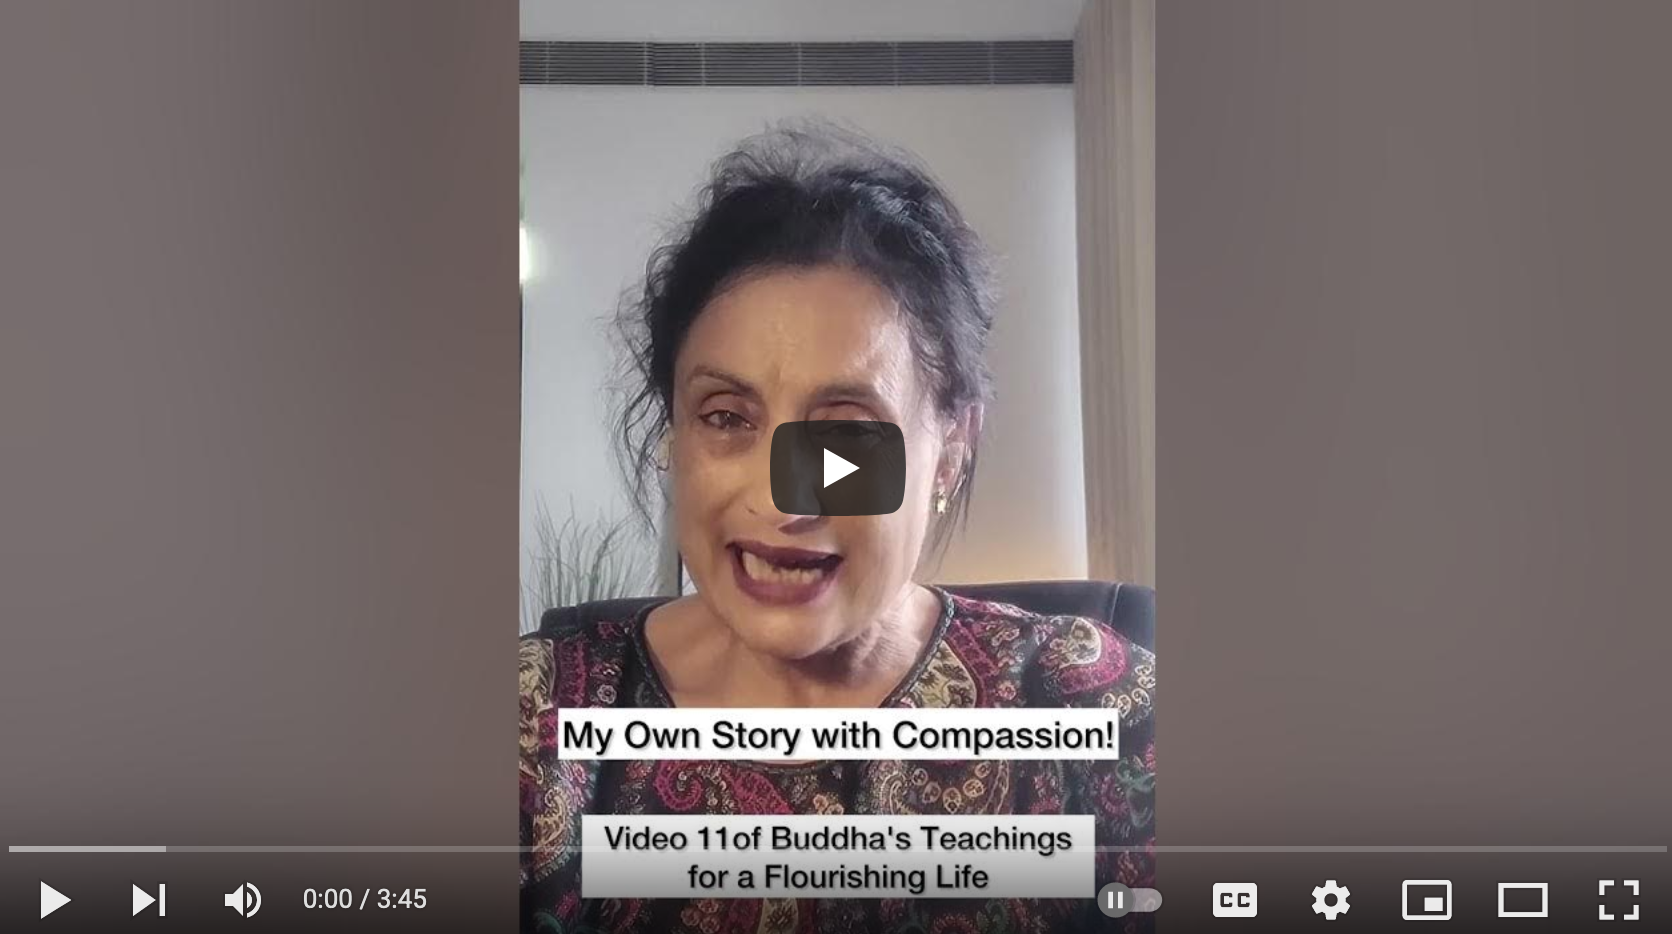 My Own Story with Compassion